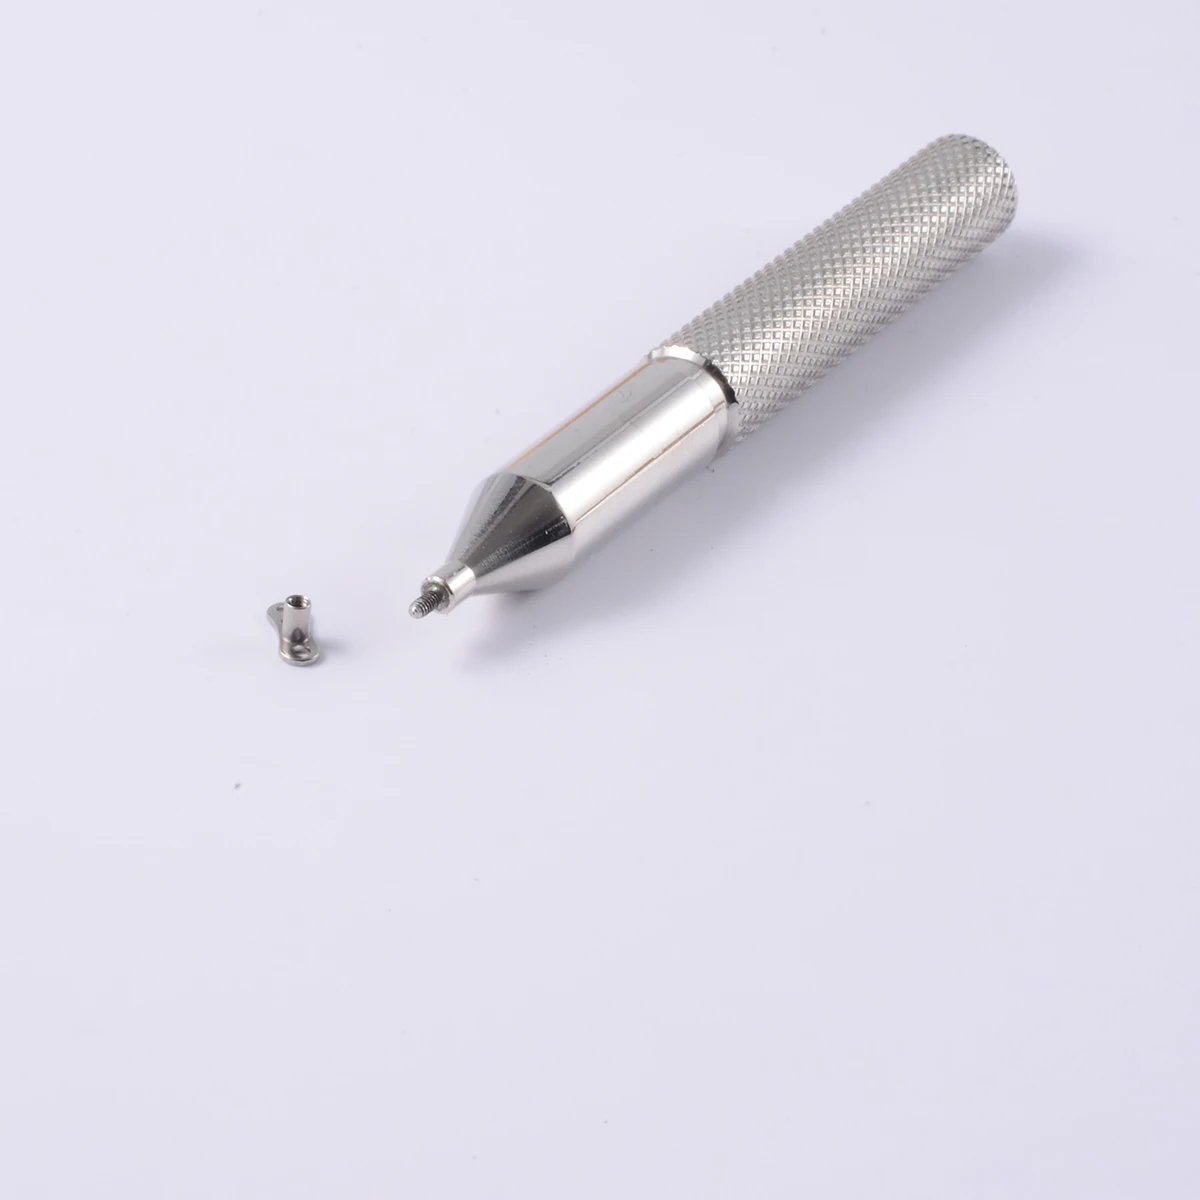 1Pc Steel Professional Premier Grip Dermal Anchor Insertion Taper Holding Tool for 16g Internally Threaded Body Piercing Jewelry images - 6